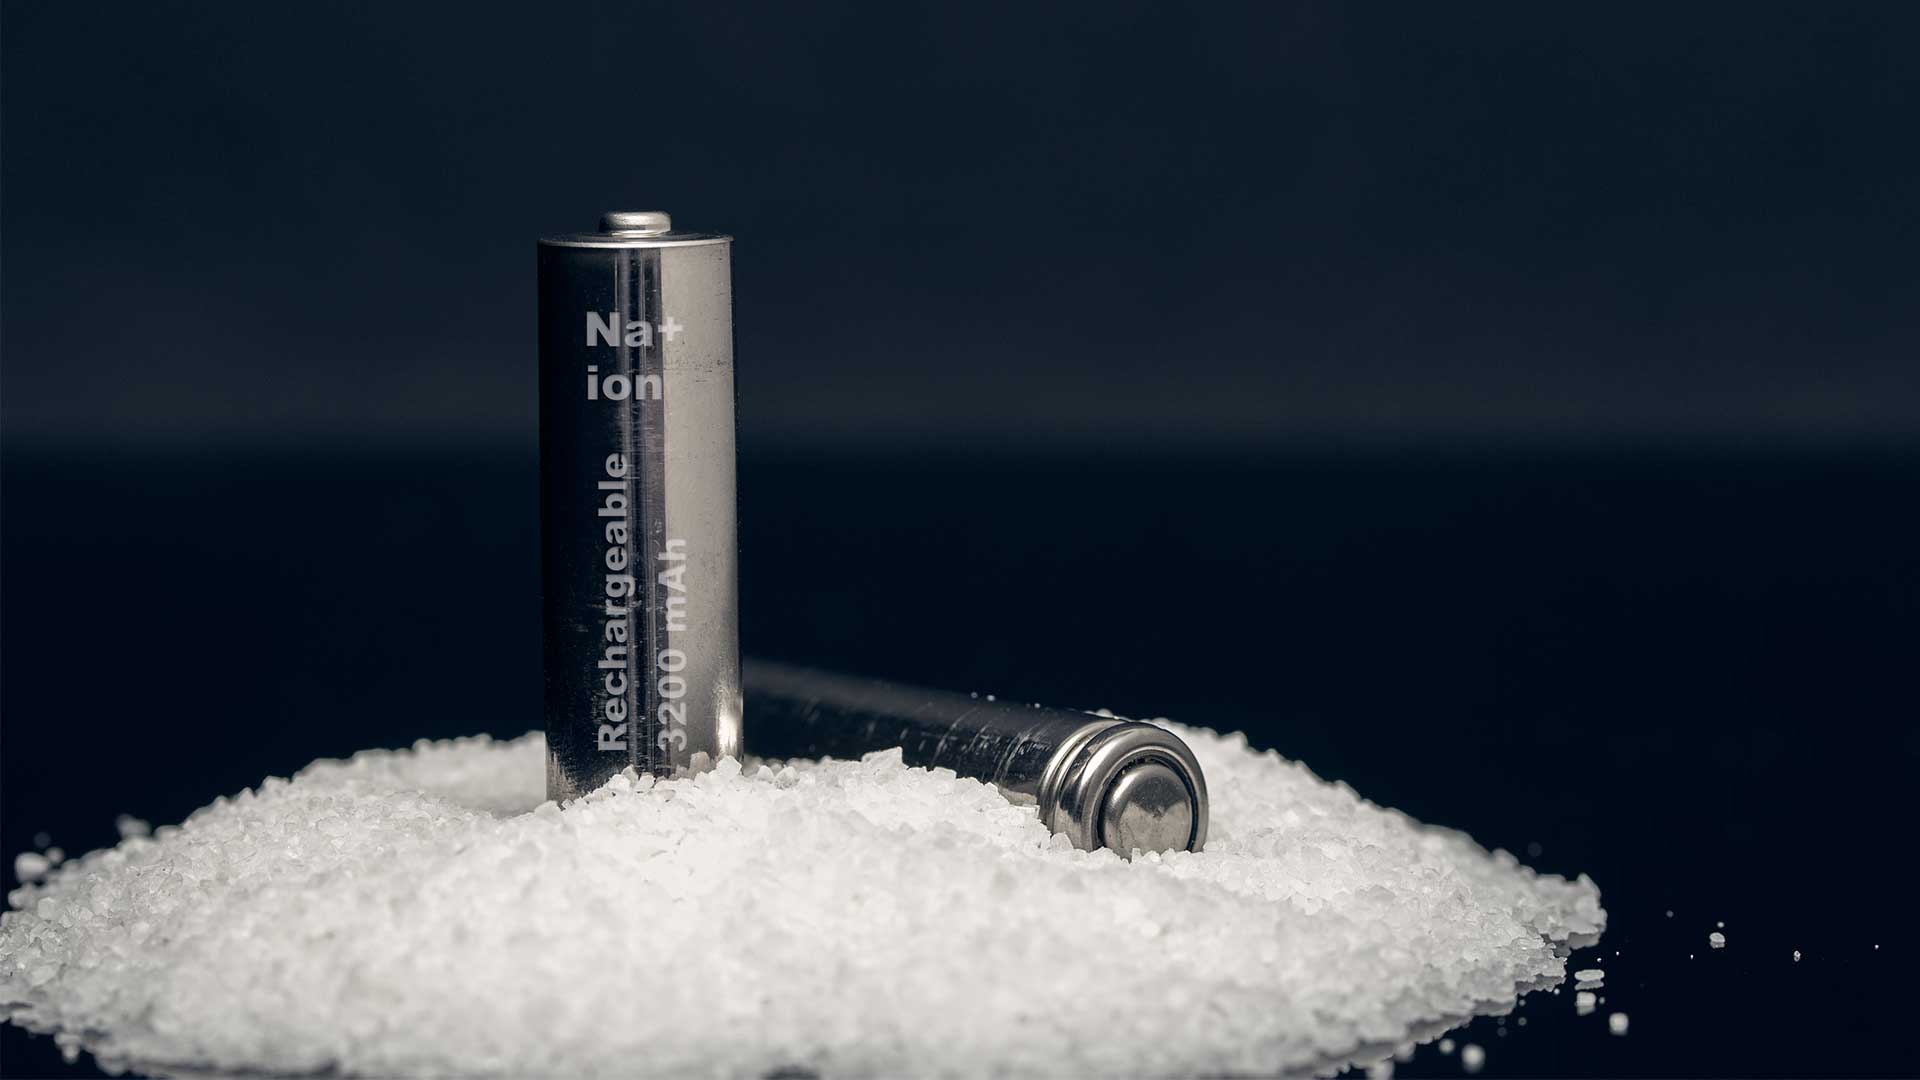 Facts about Sodium-ion Batteriesy